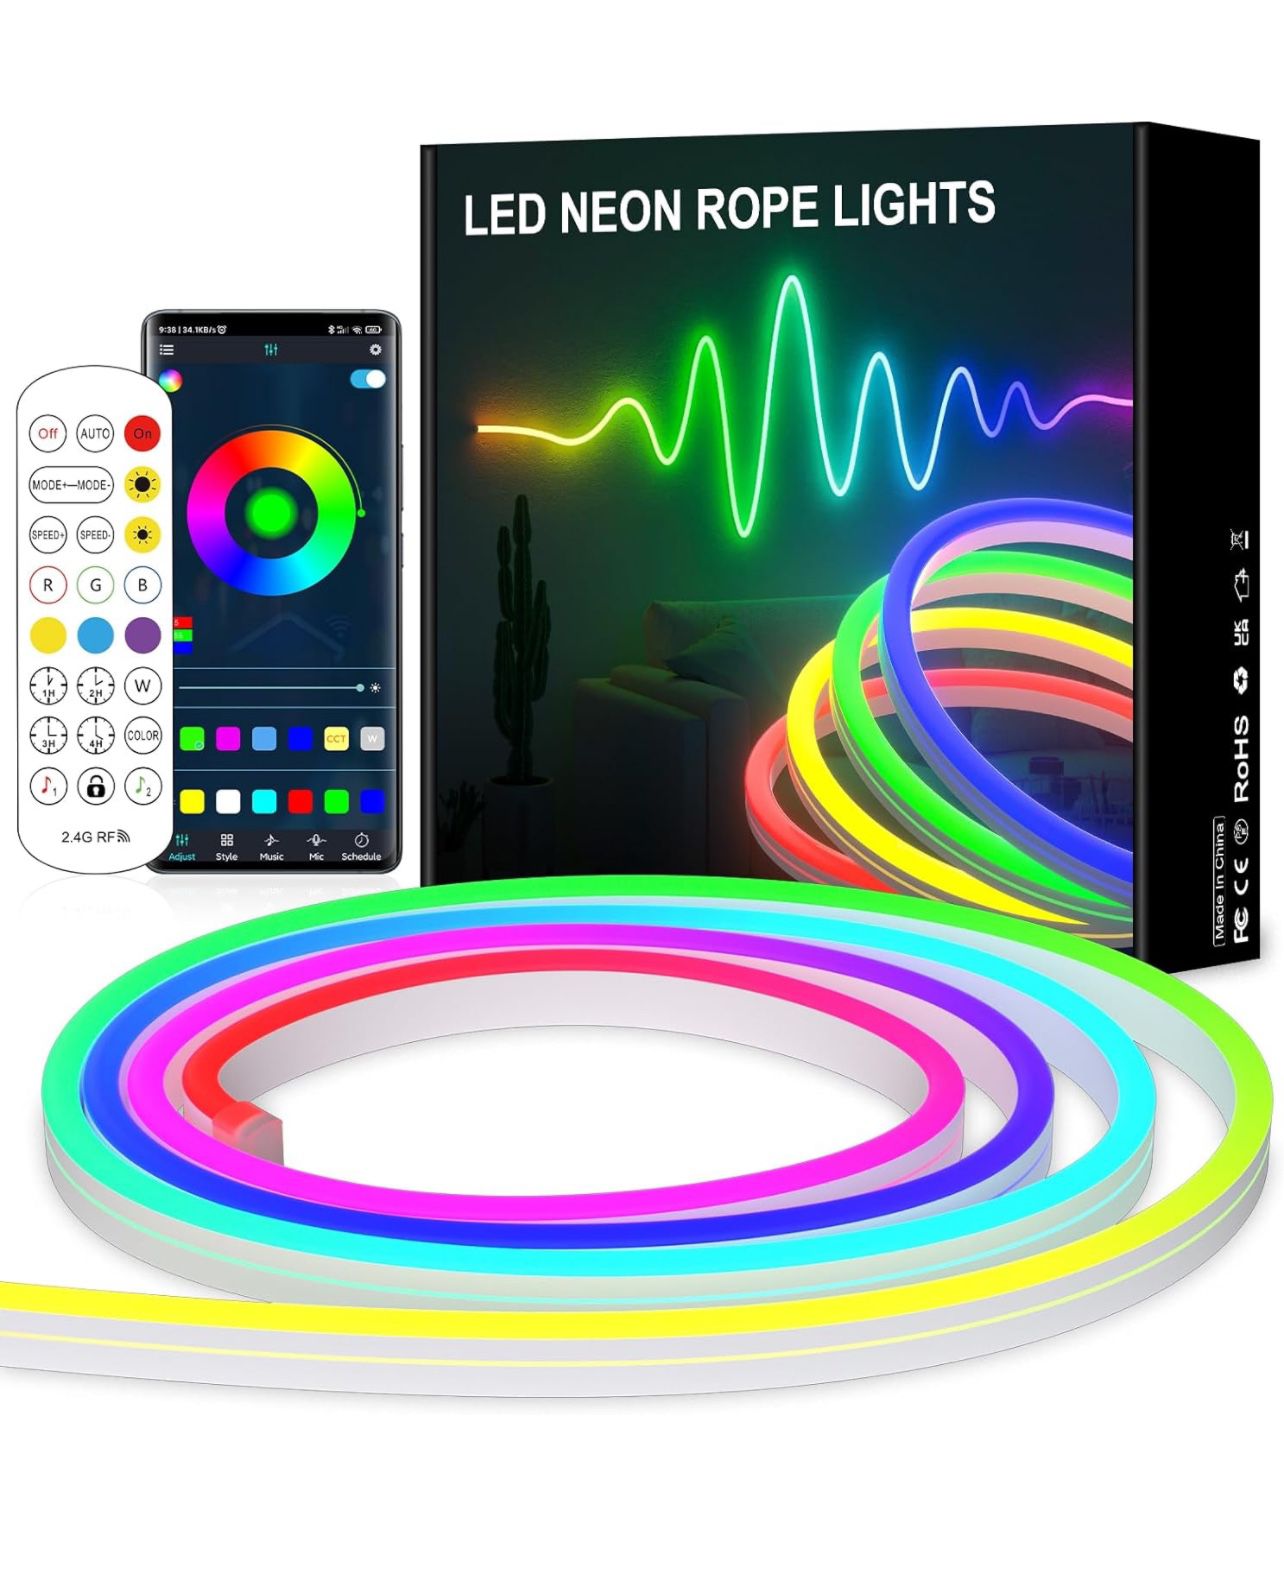 Brandnew RGB Neon LED Bluetooth -32.8FT(2 * 16.4FT) RGB 3535 LED Music Sync Color Changing Lights, App Controlled - for Bedroom, Party, Kitchen Decora